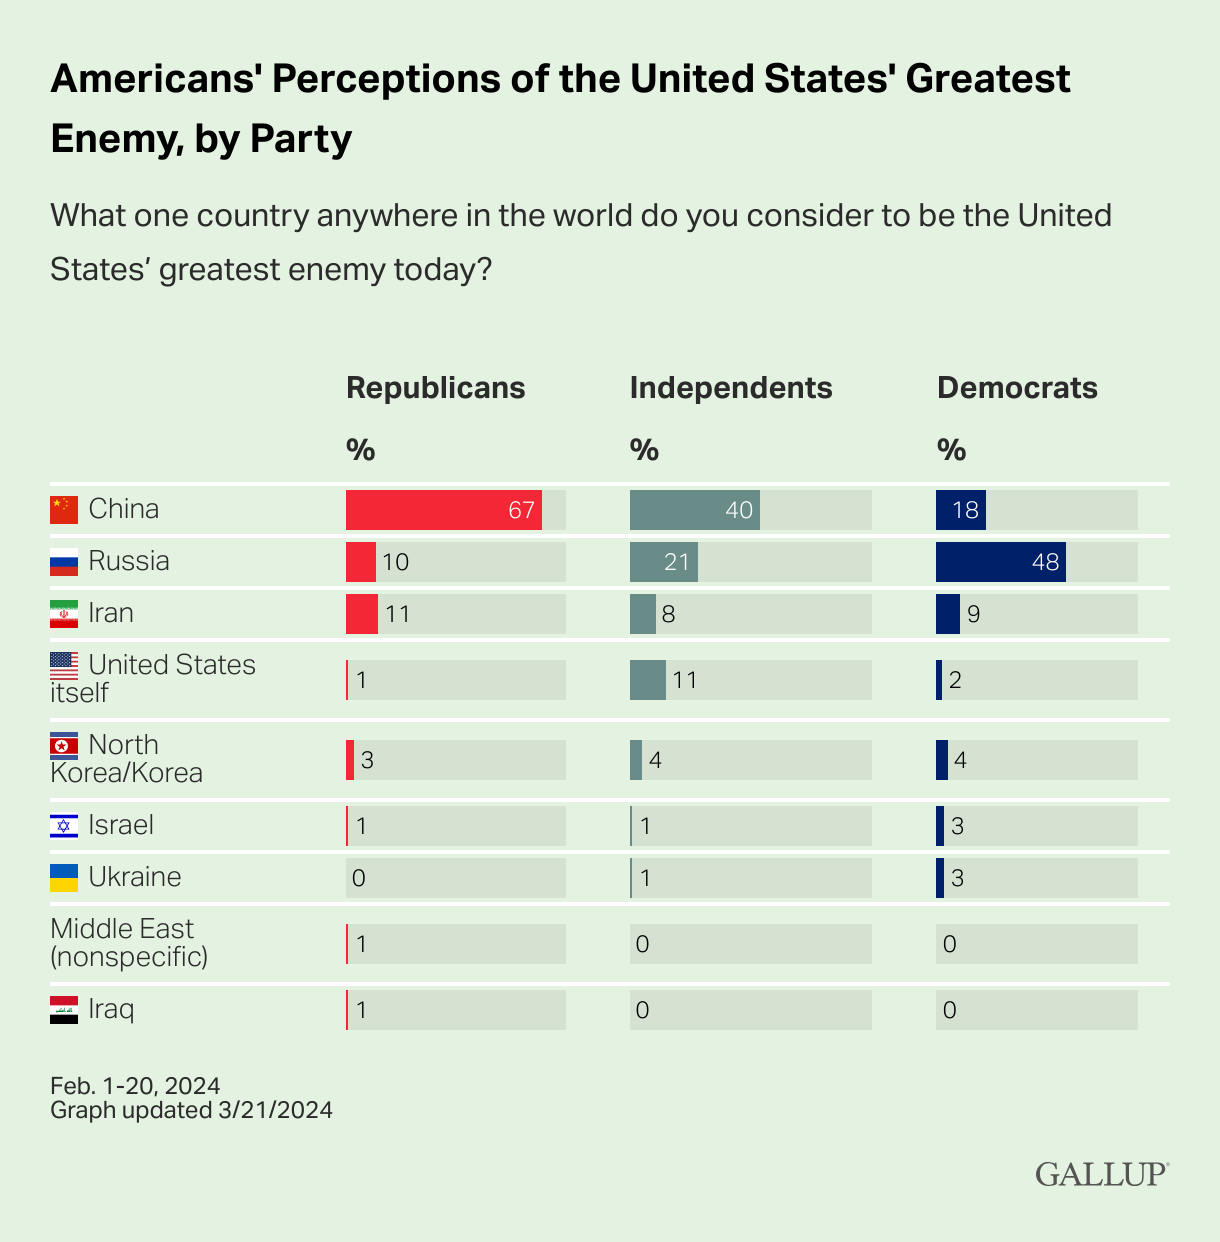 americans-perceptions-of-the-united-states-greatest-enemy-by-party.png 미국인들의 최근 타국에 대한 인식조사